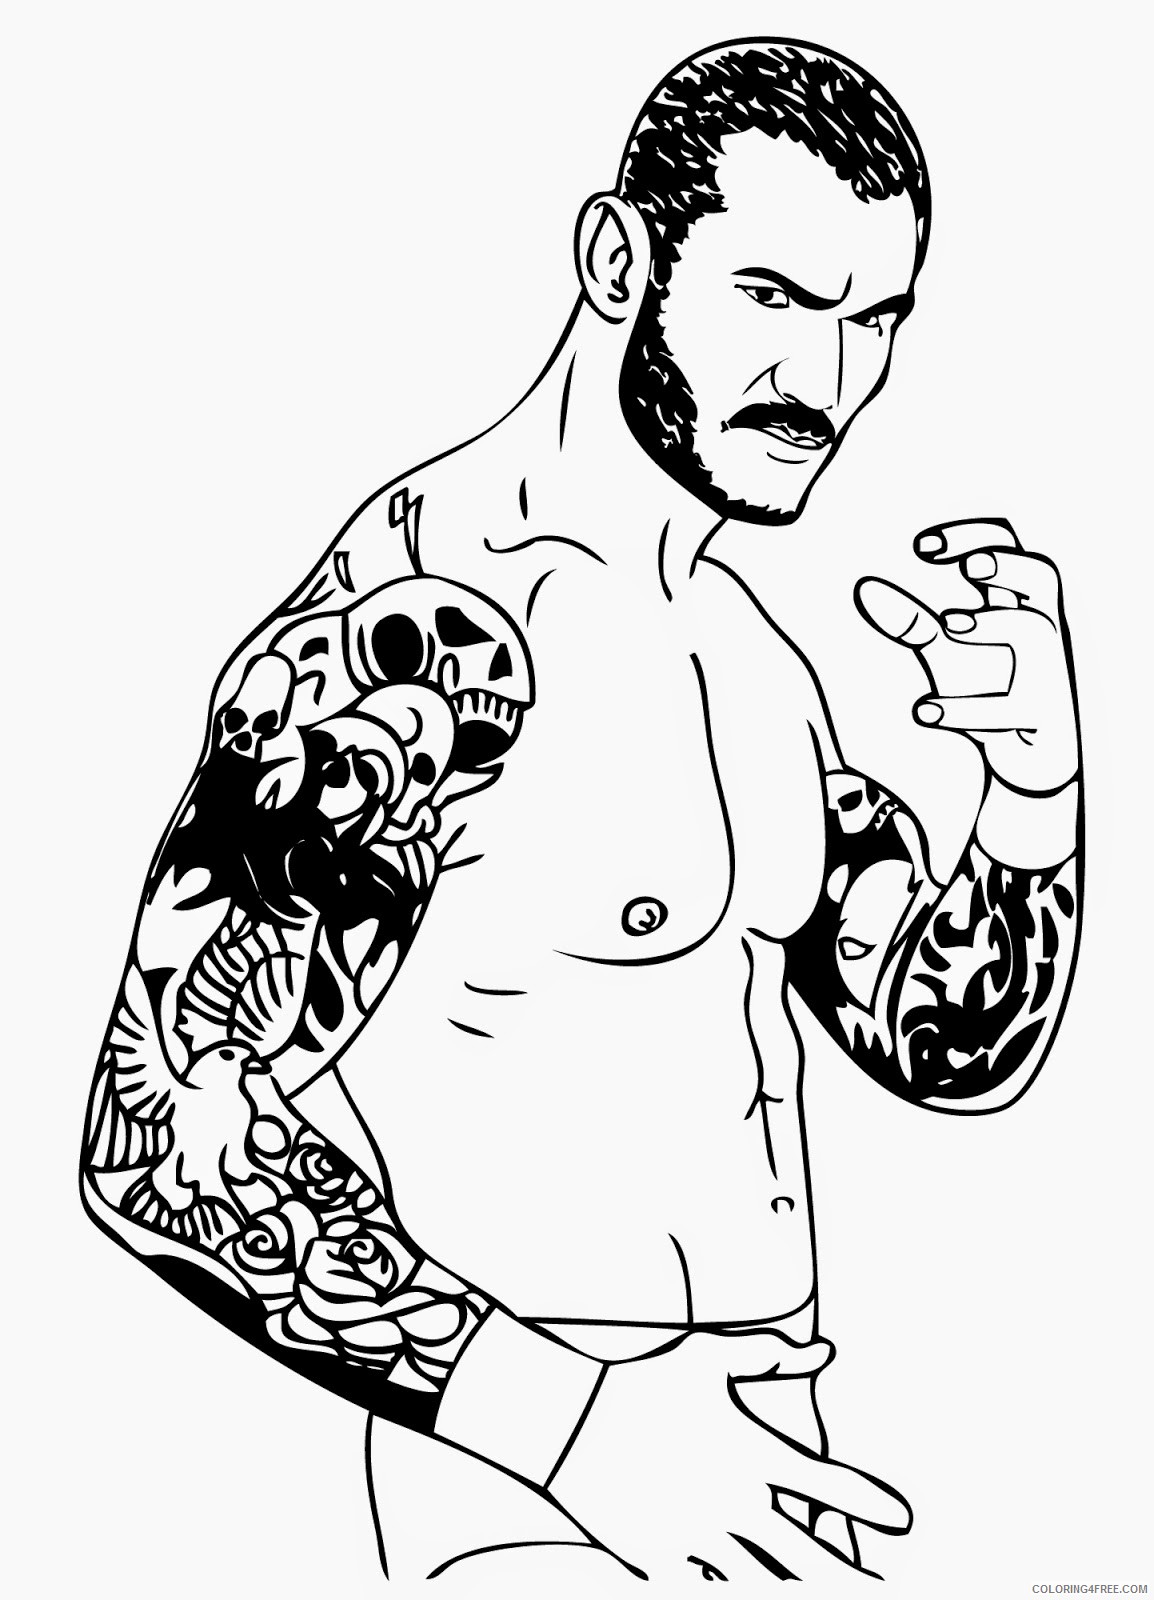 wwe coloring pages randy orton Coloring4free